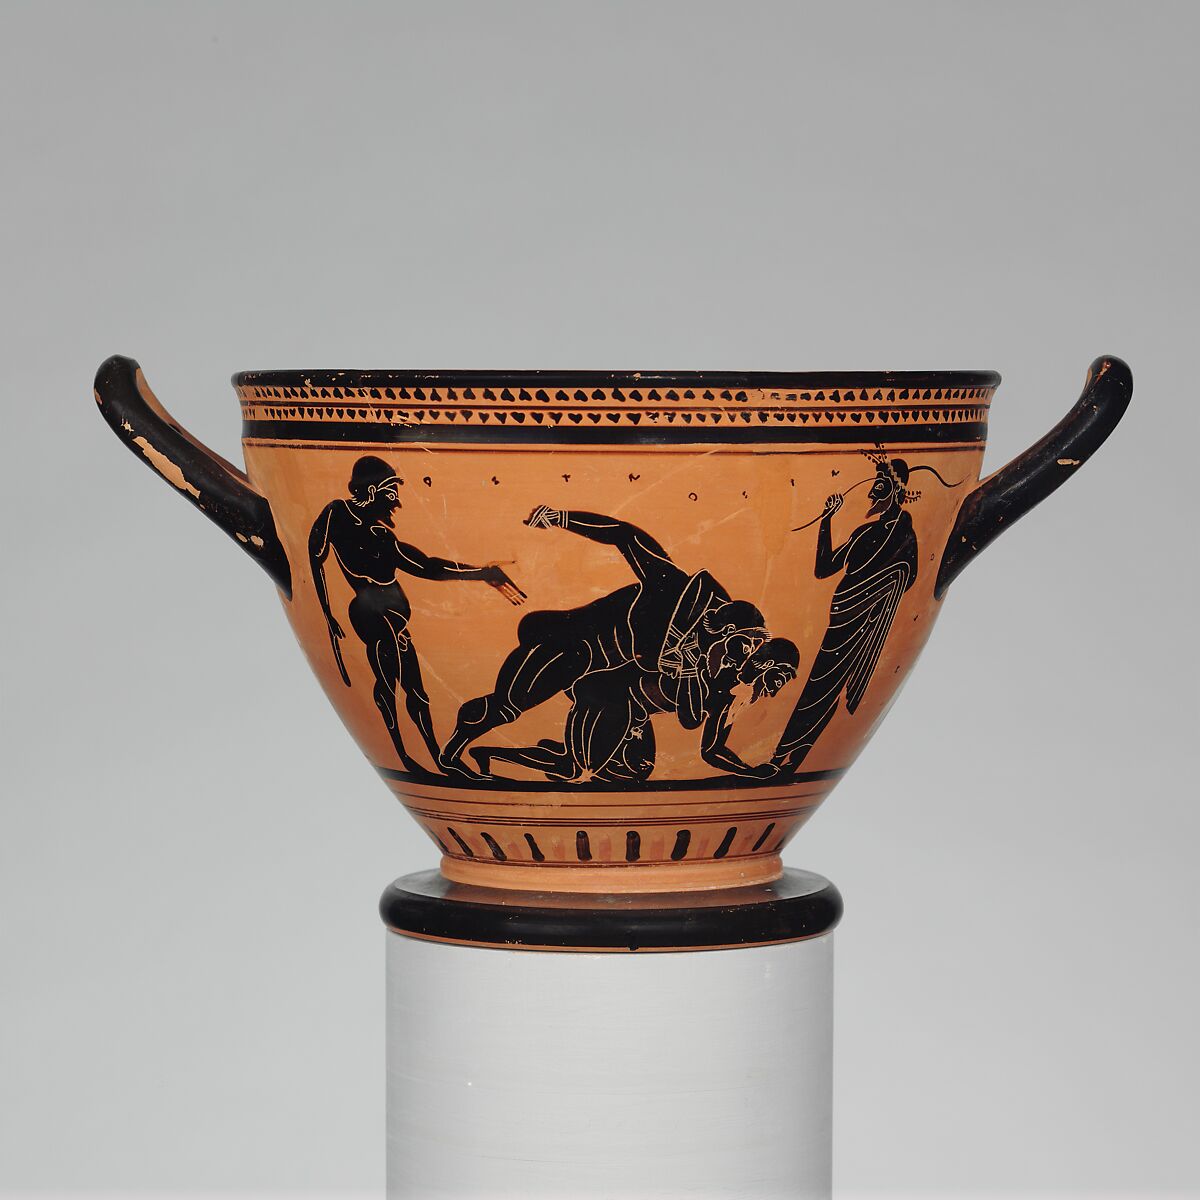 Terracotta skyphos (deep drinking cup), Attributed to the Theseus Painter, Terracotta, Greek, Attic 